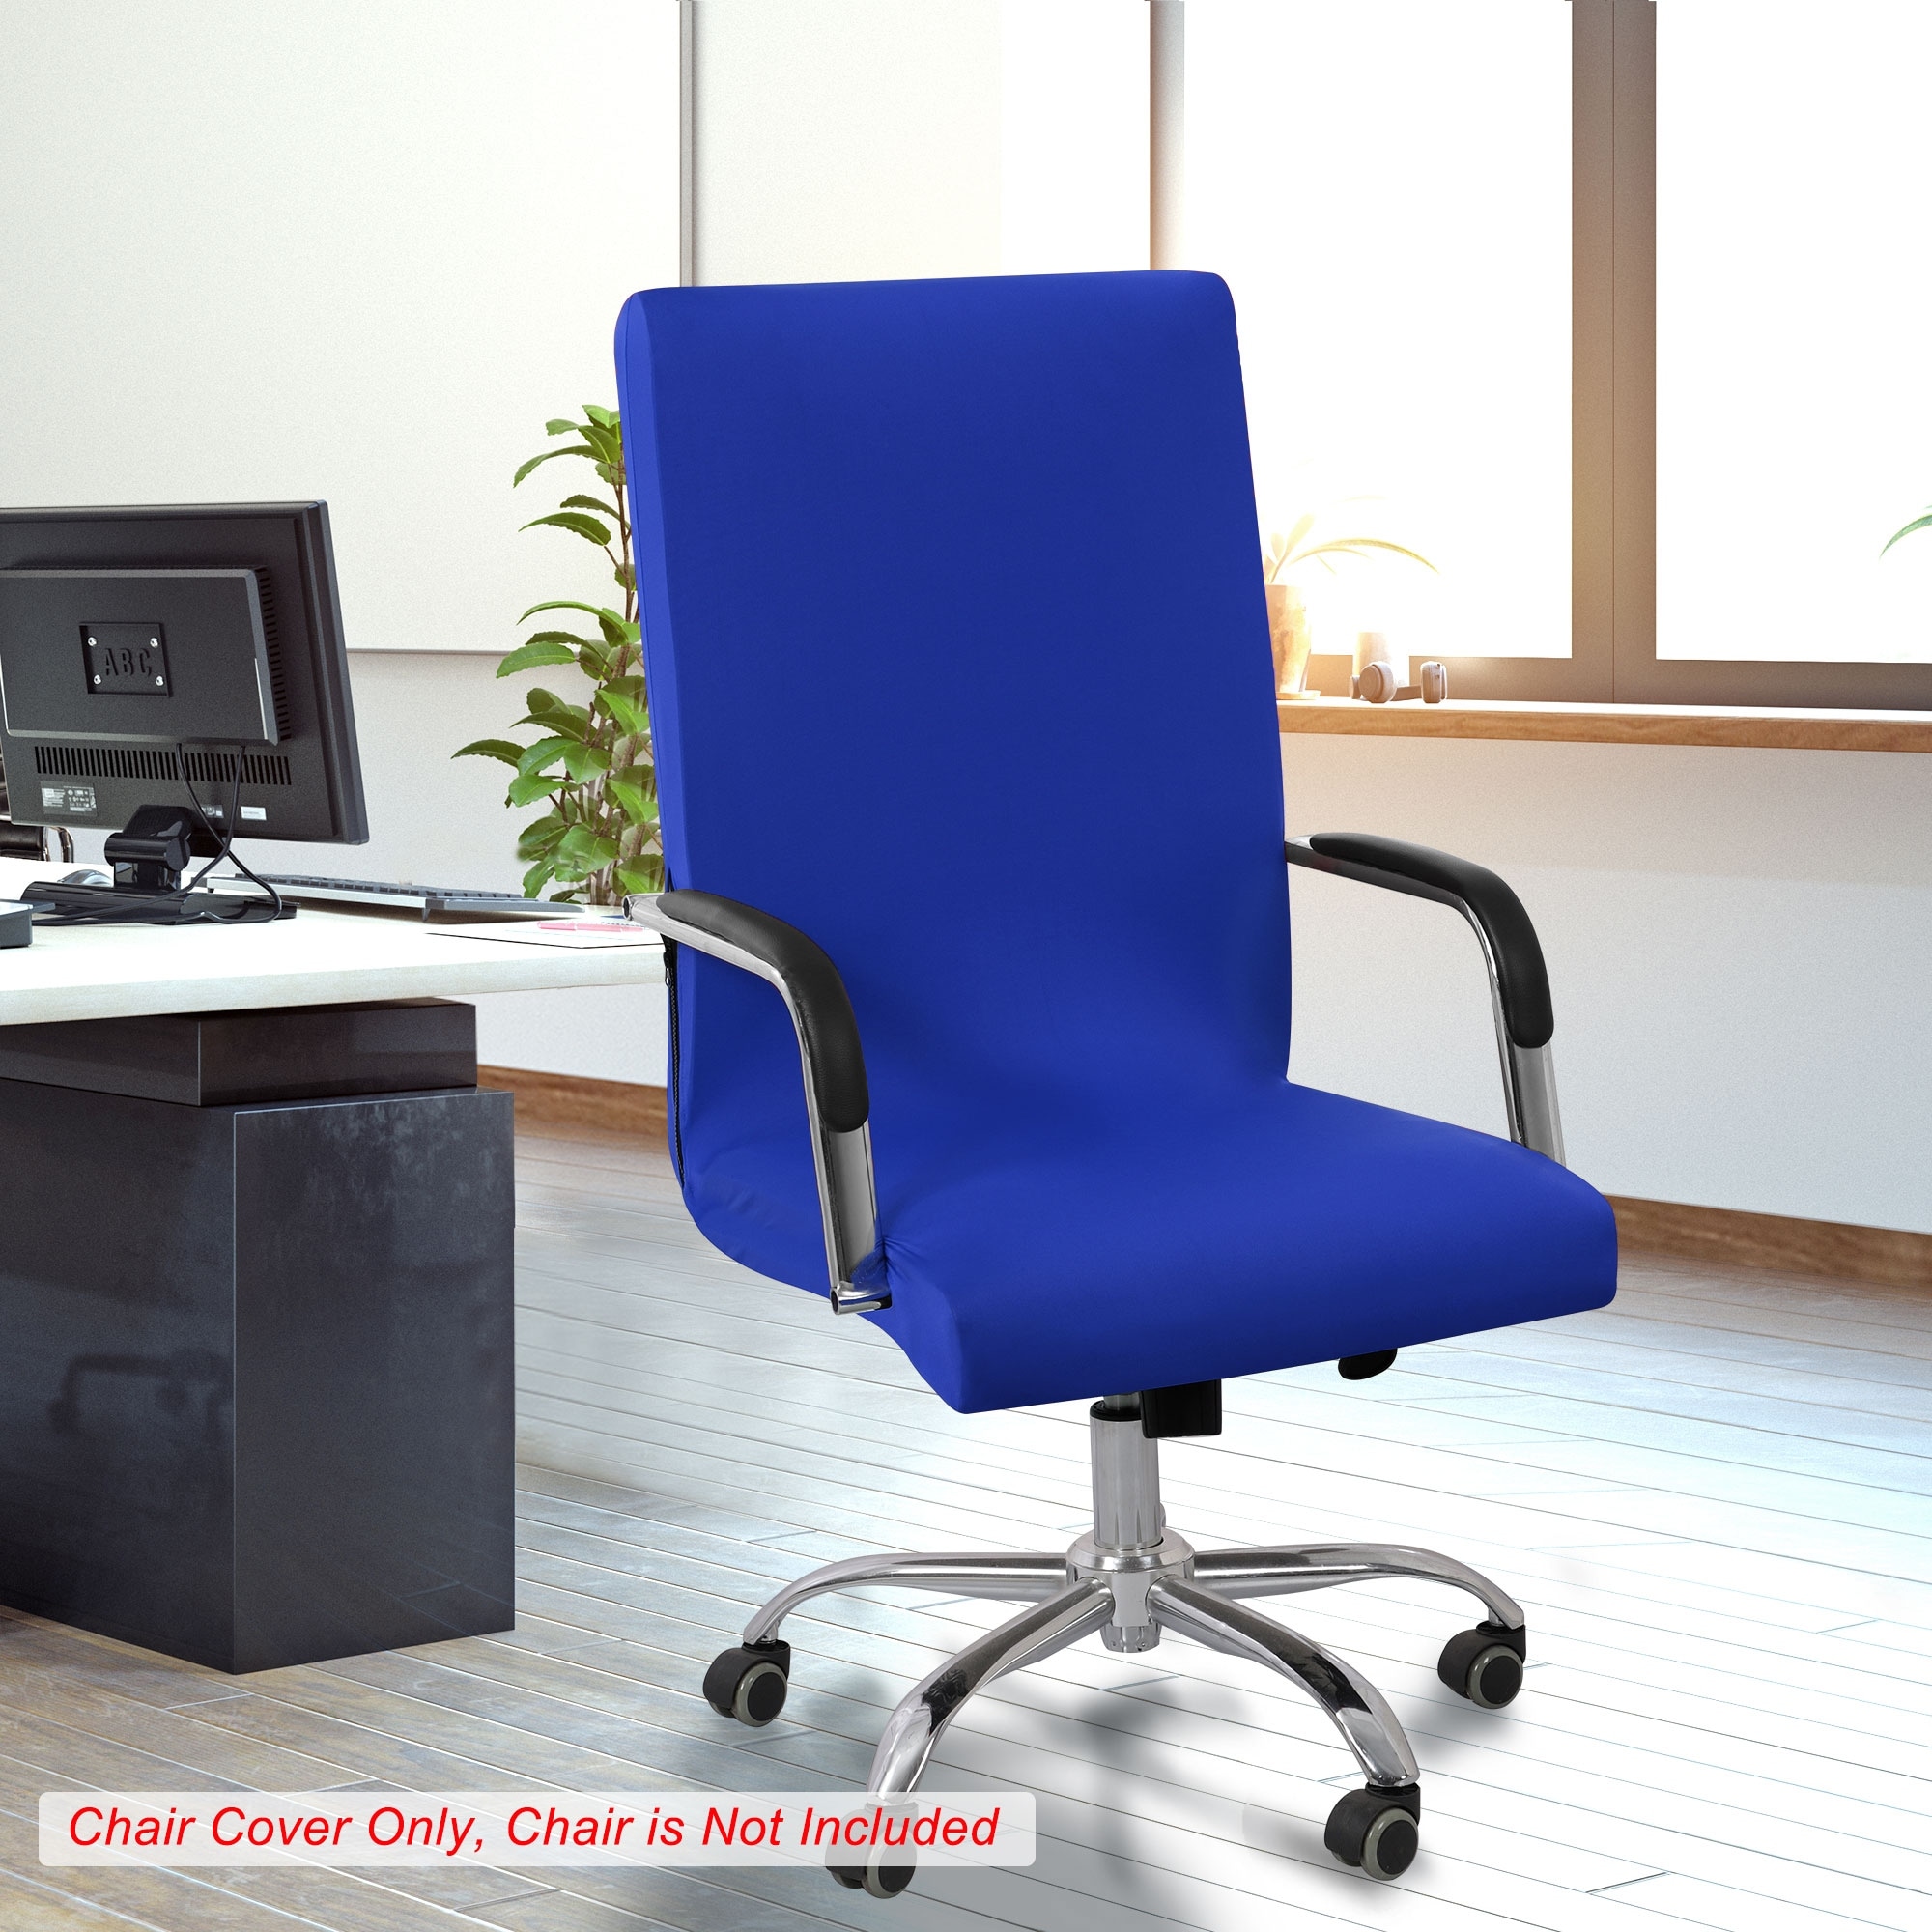 Freahap Chair Cover Stretchable Removable Computer Office Swivel Chair Cover #9 